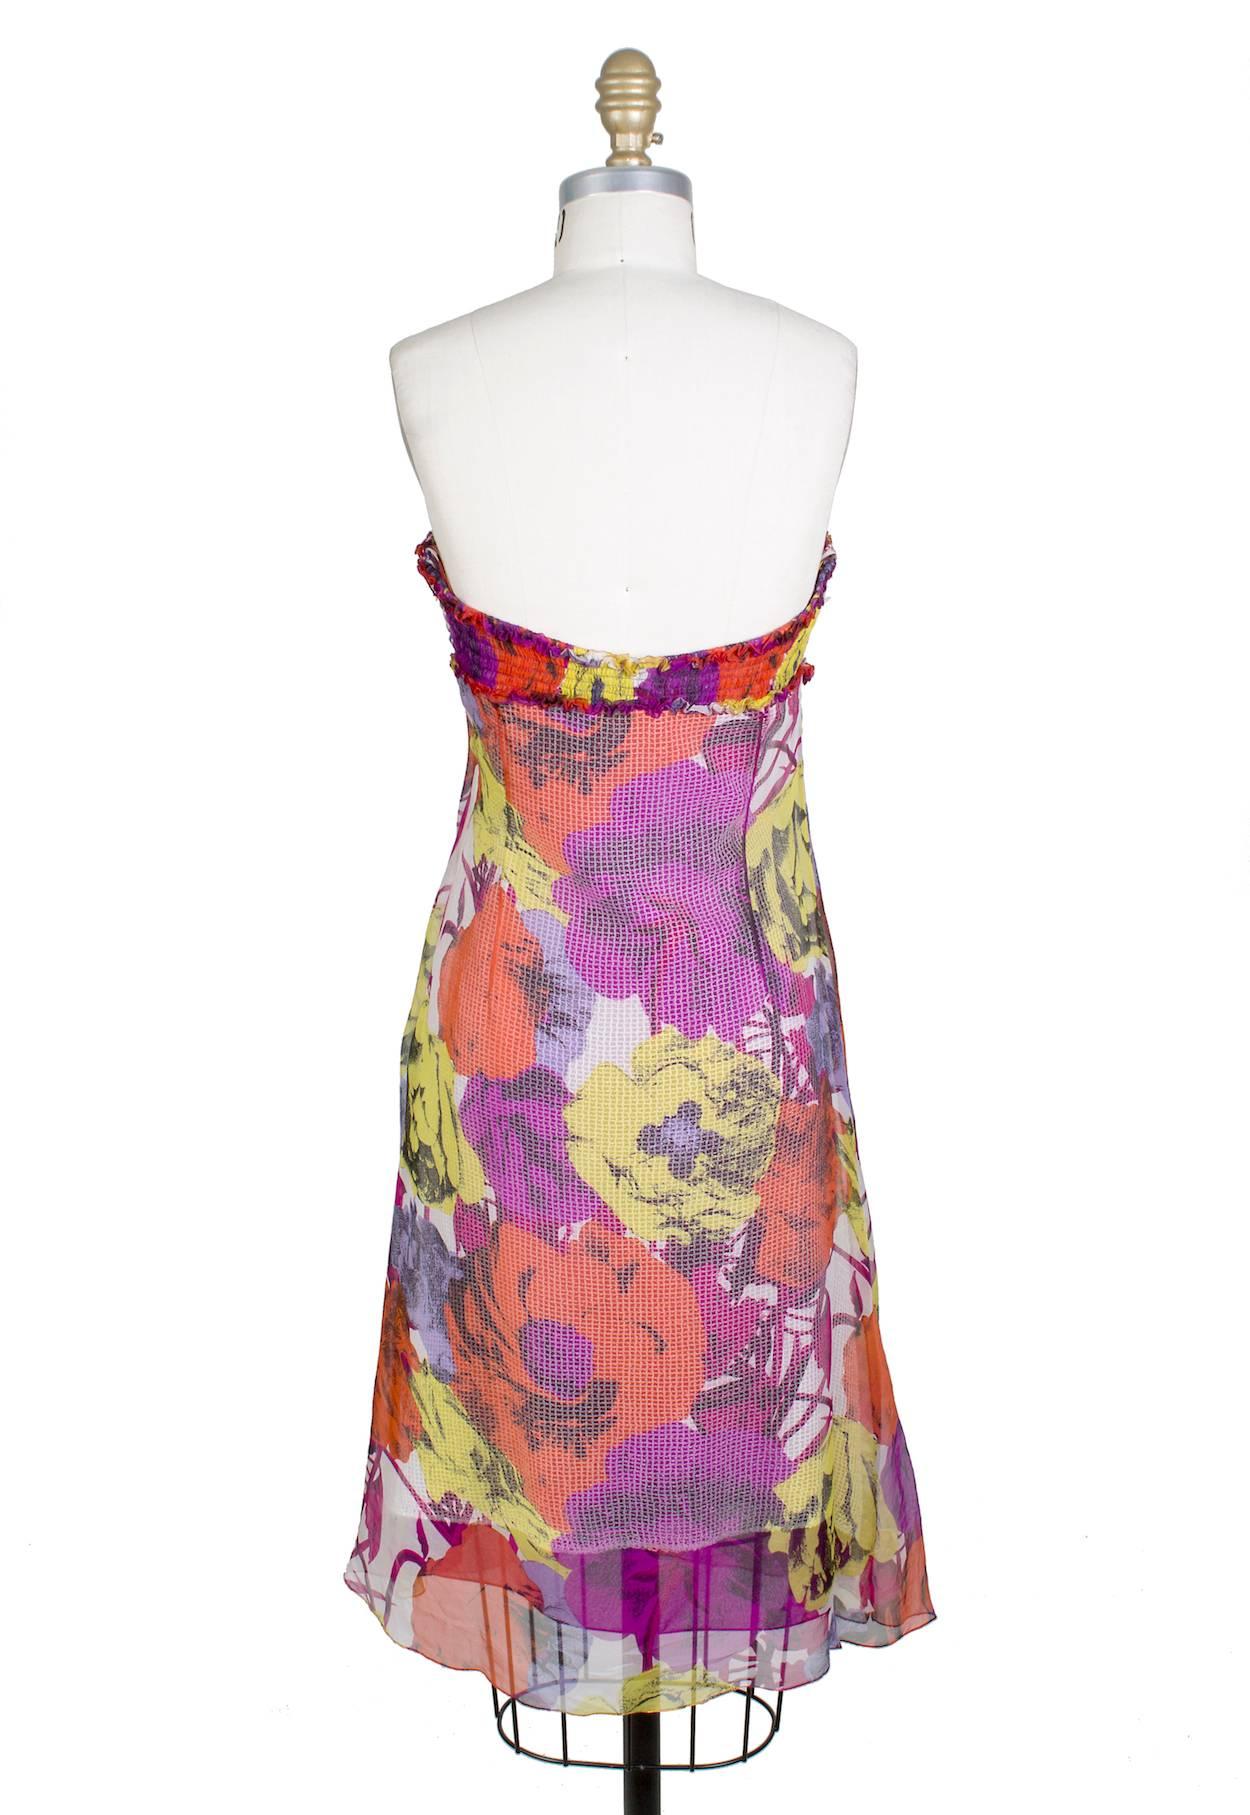 This is a strapless dress from Versace circa 1990s.  It features a bright bold floral  pop art print on a sheer silk overlay.  The bust has elastic ruching.